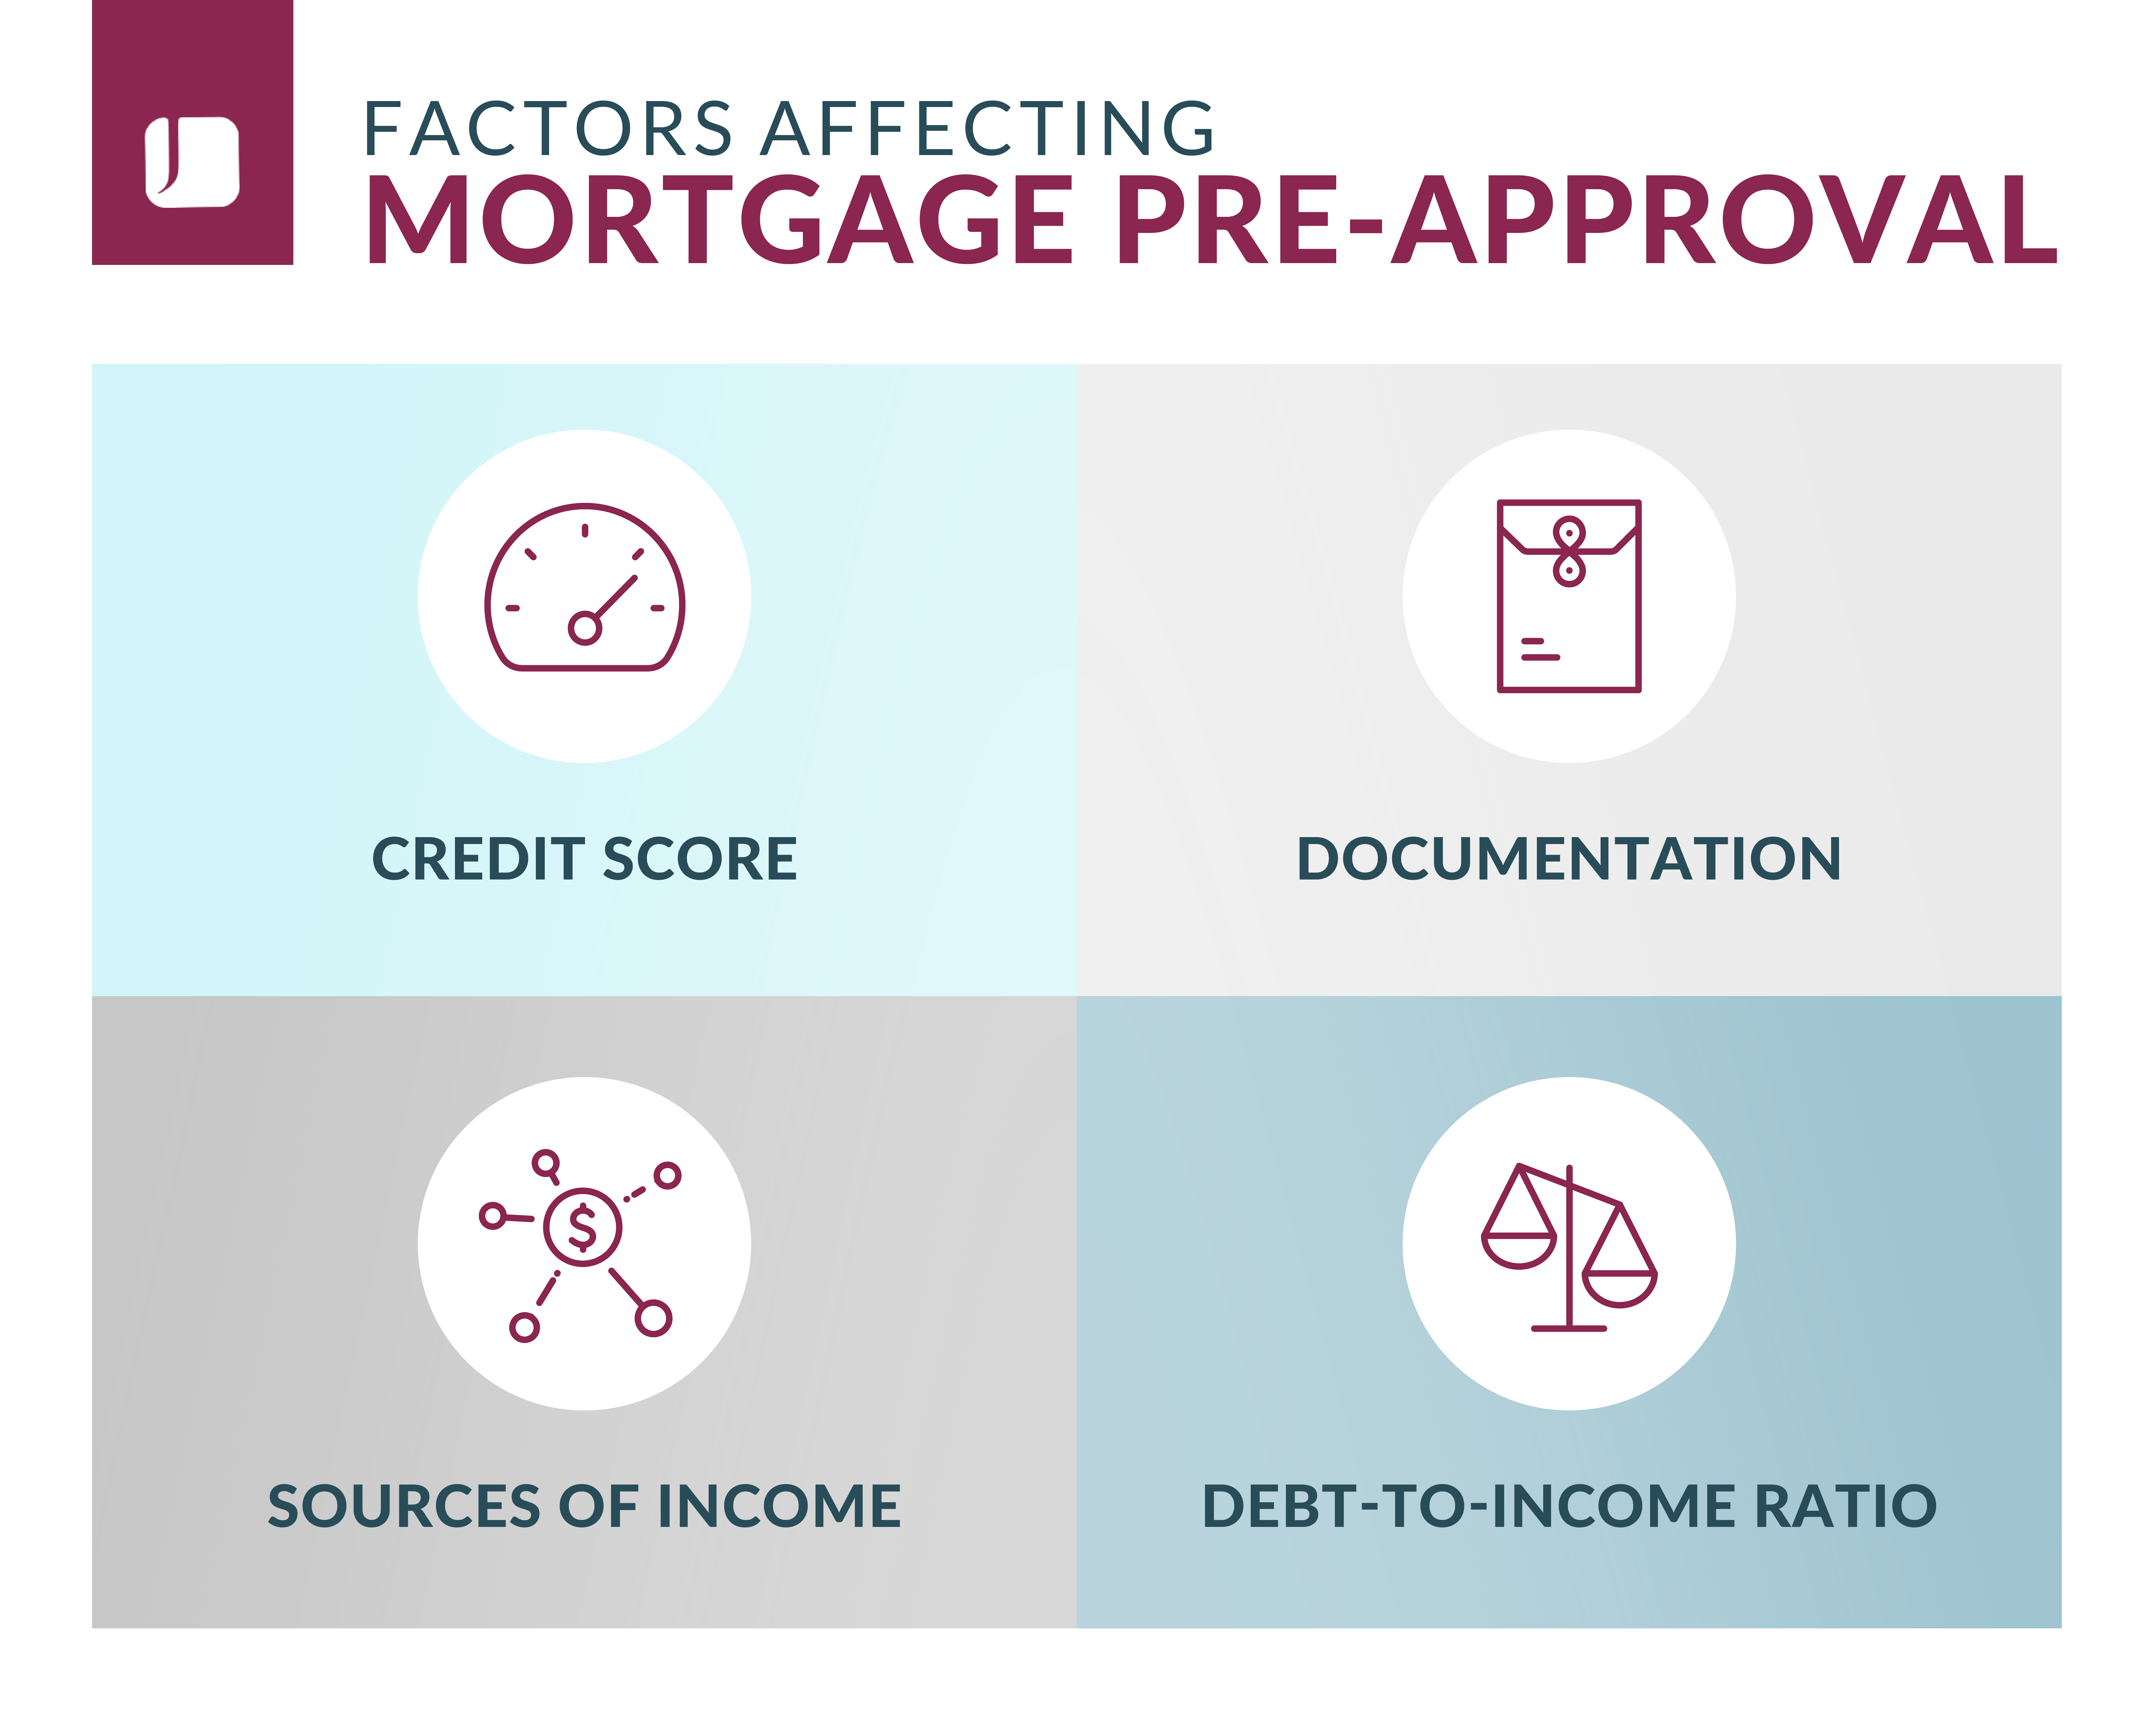 Factors Affecting Mortgage Pre-Approval